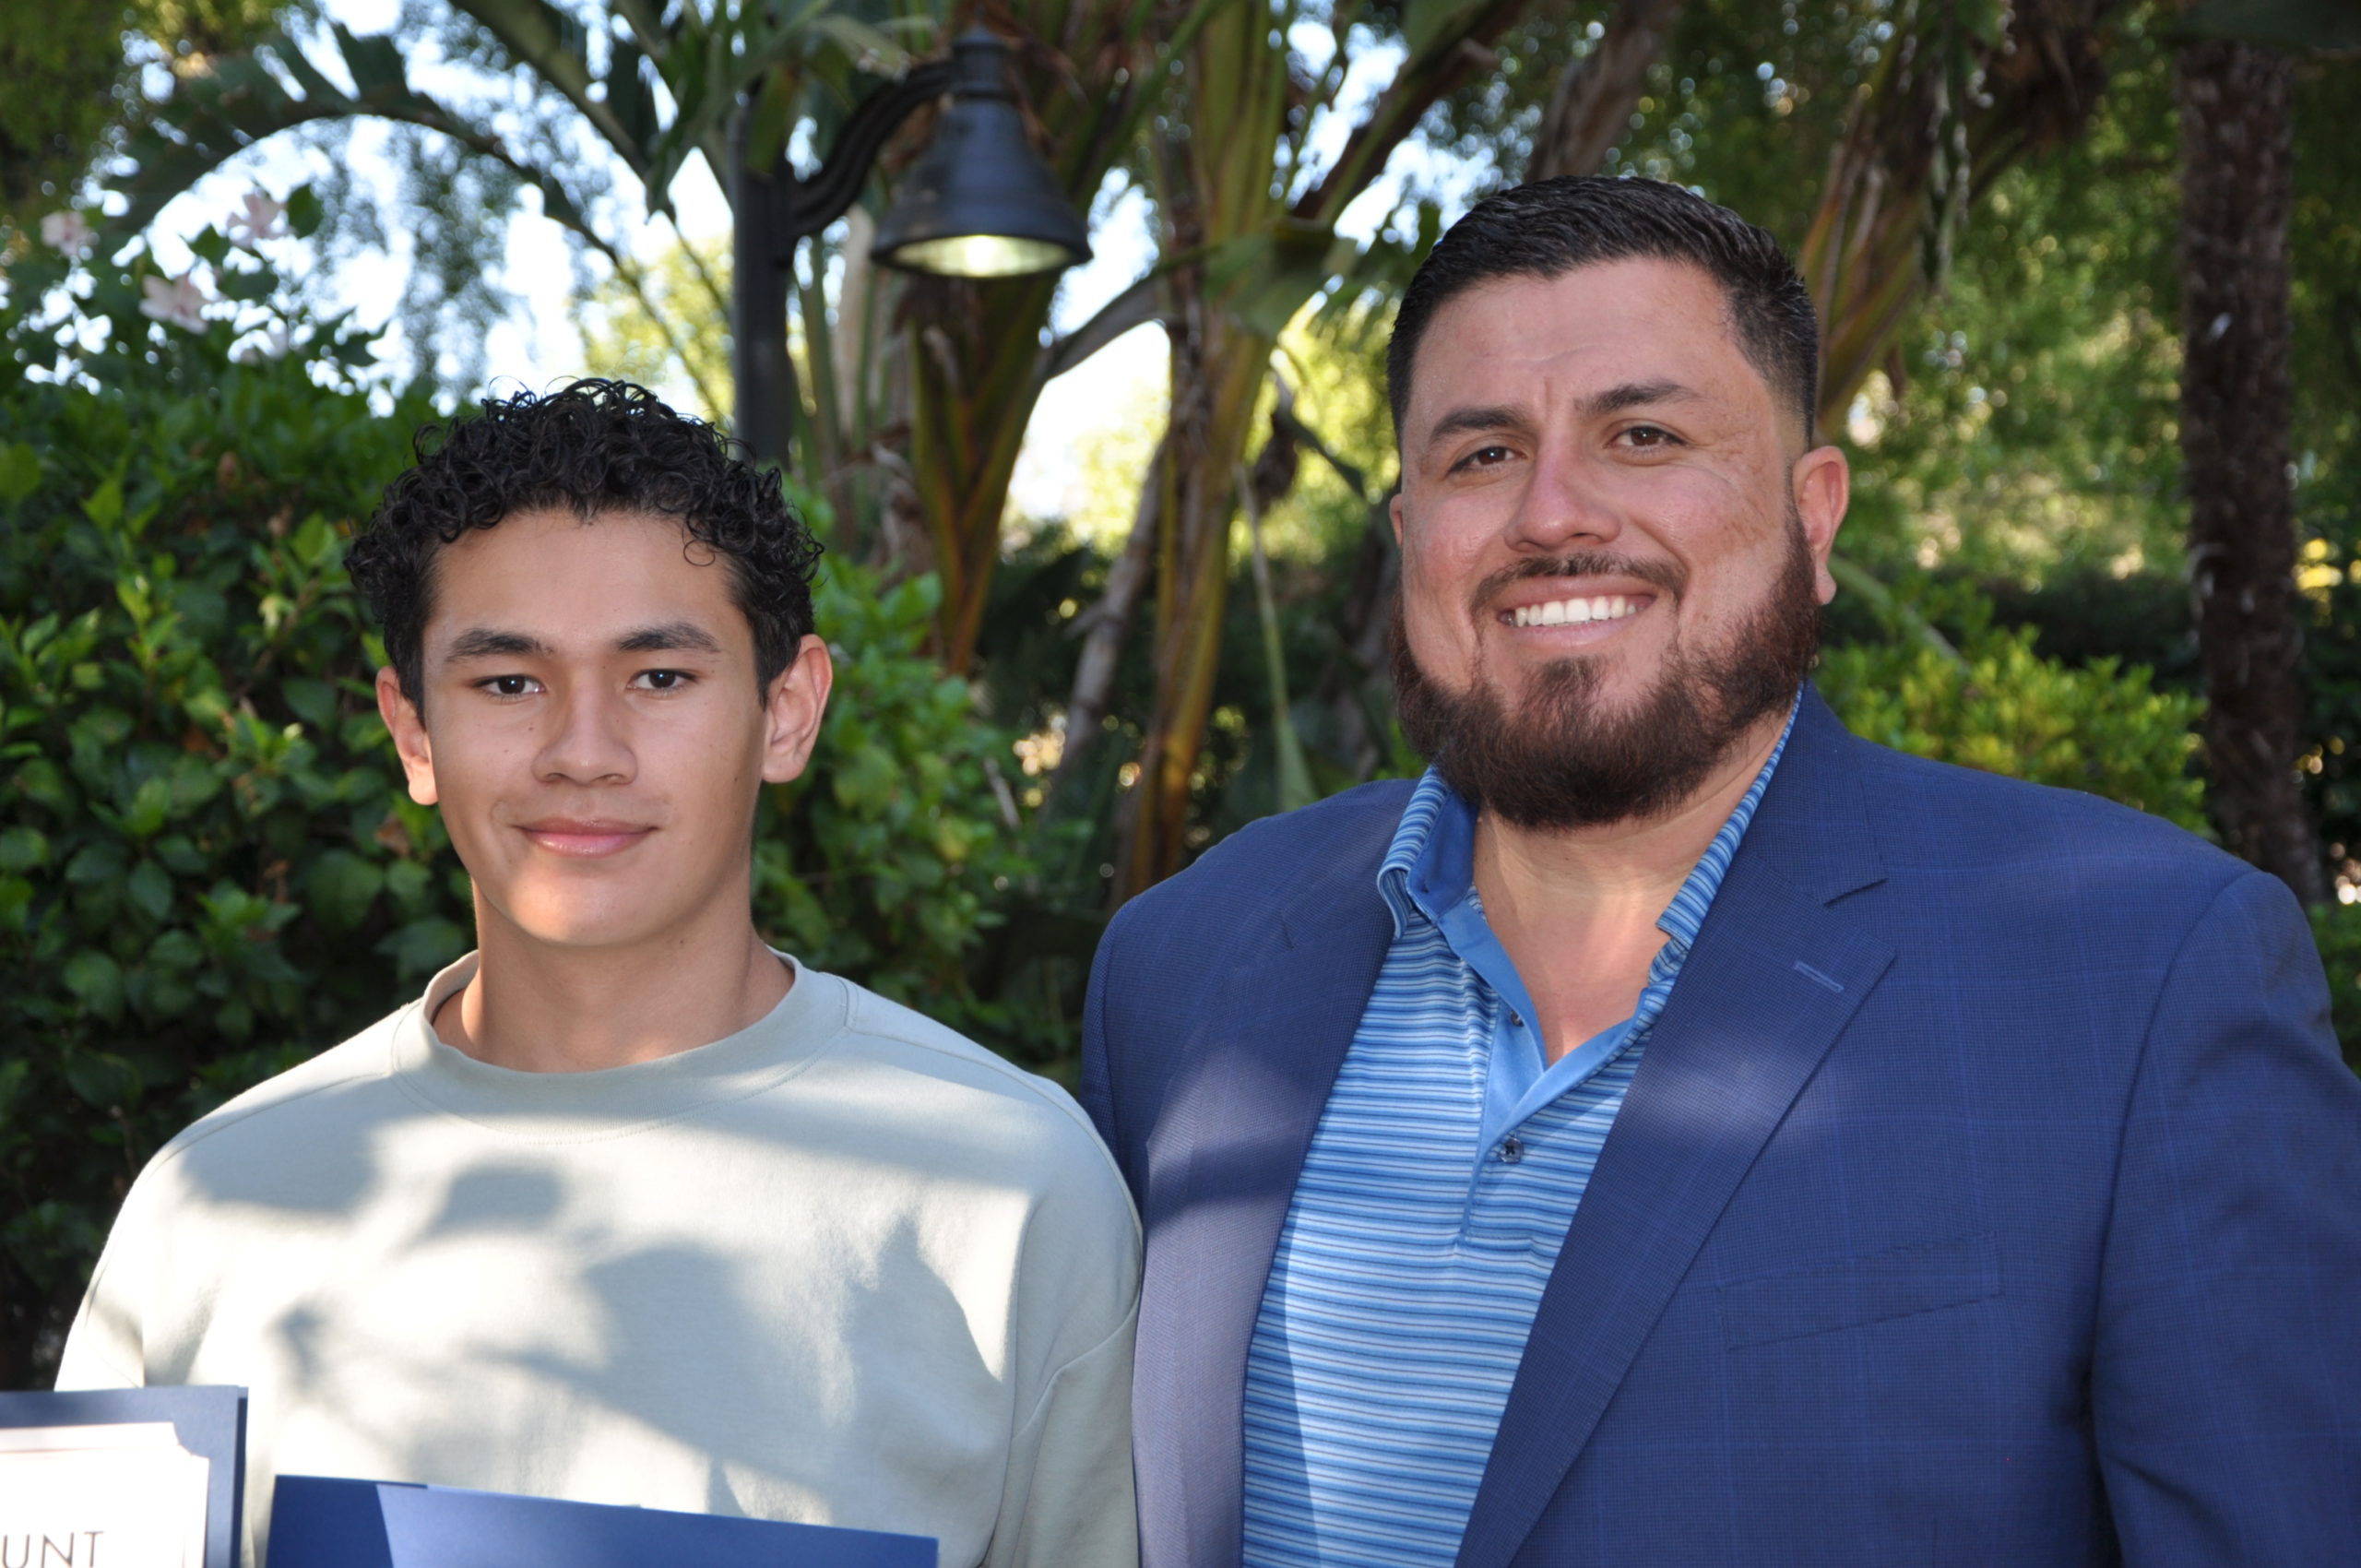 SkillsetGroup CMO Jose Baca, right, poses with a PEP 2022 scholarship recipient in the city of Paramount.